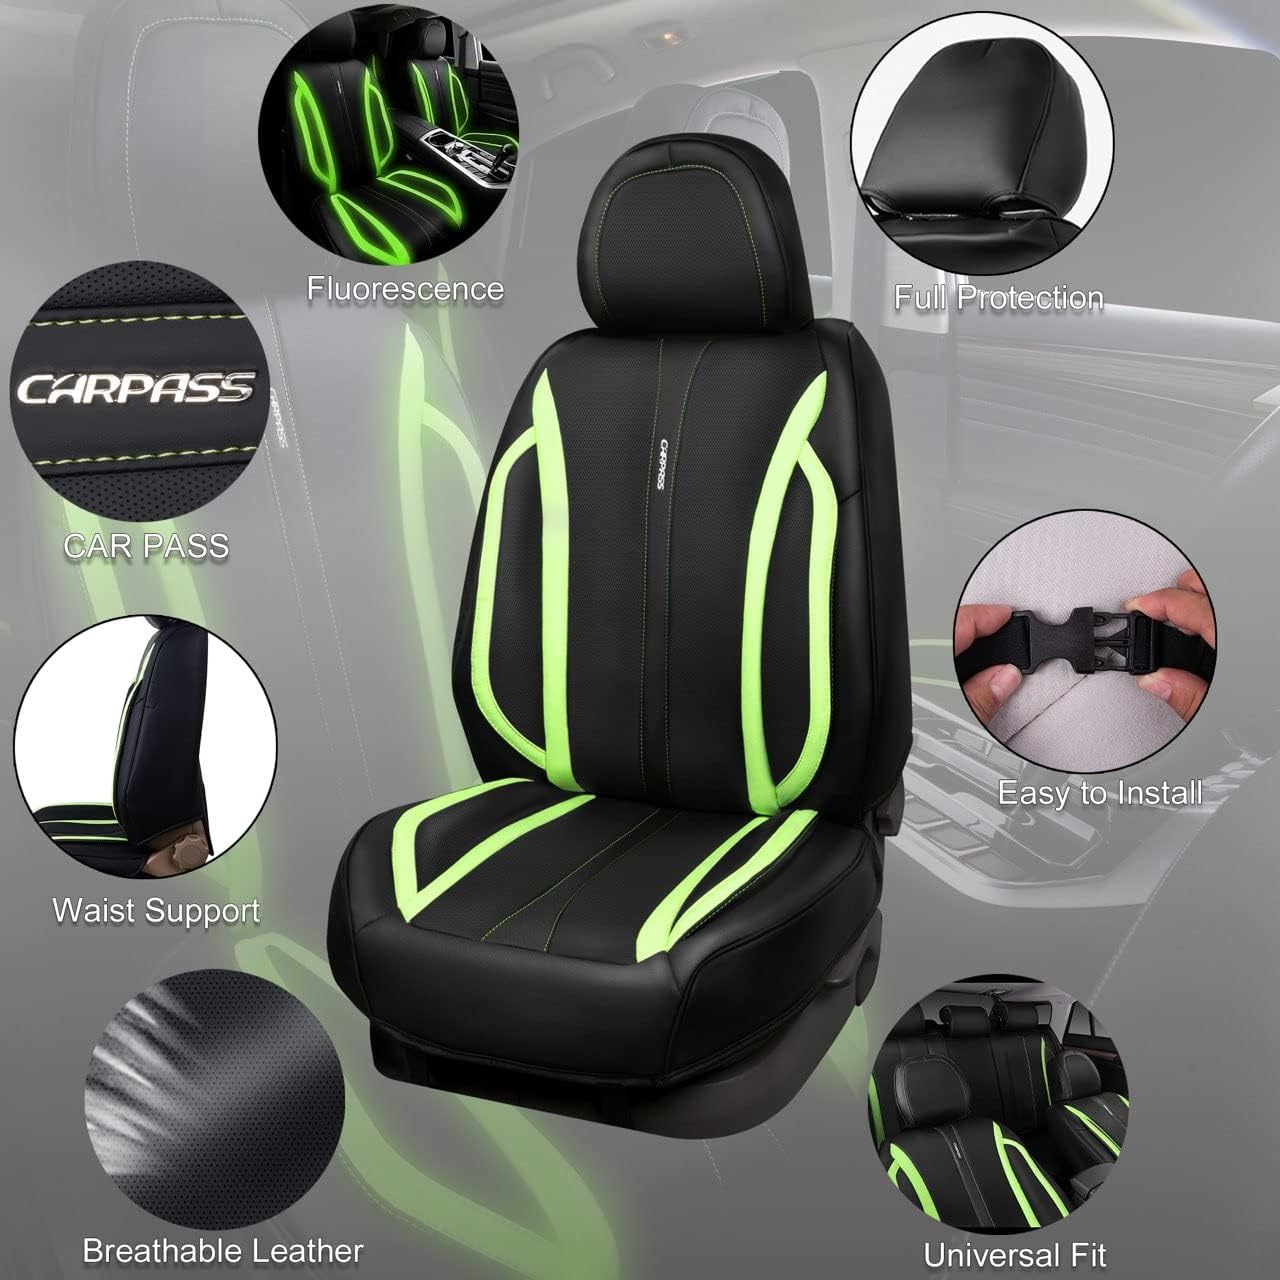 CAR PASS Nappa Leather Car Seat Covers,Breathable and Waterproof for SUV Pick-up Truck Sedan,Universal Anti-Slip Driver Seat Cover with Backrest (Full Seats, Black Chameleon Iridescent Reflective)